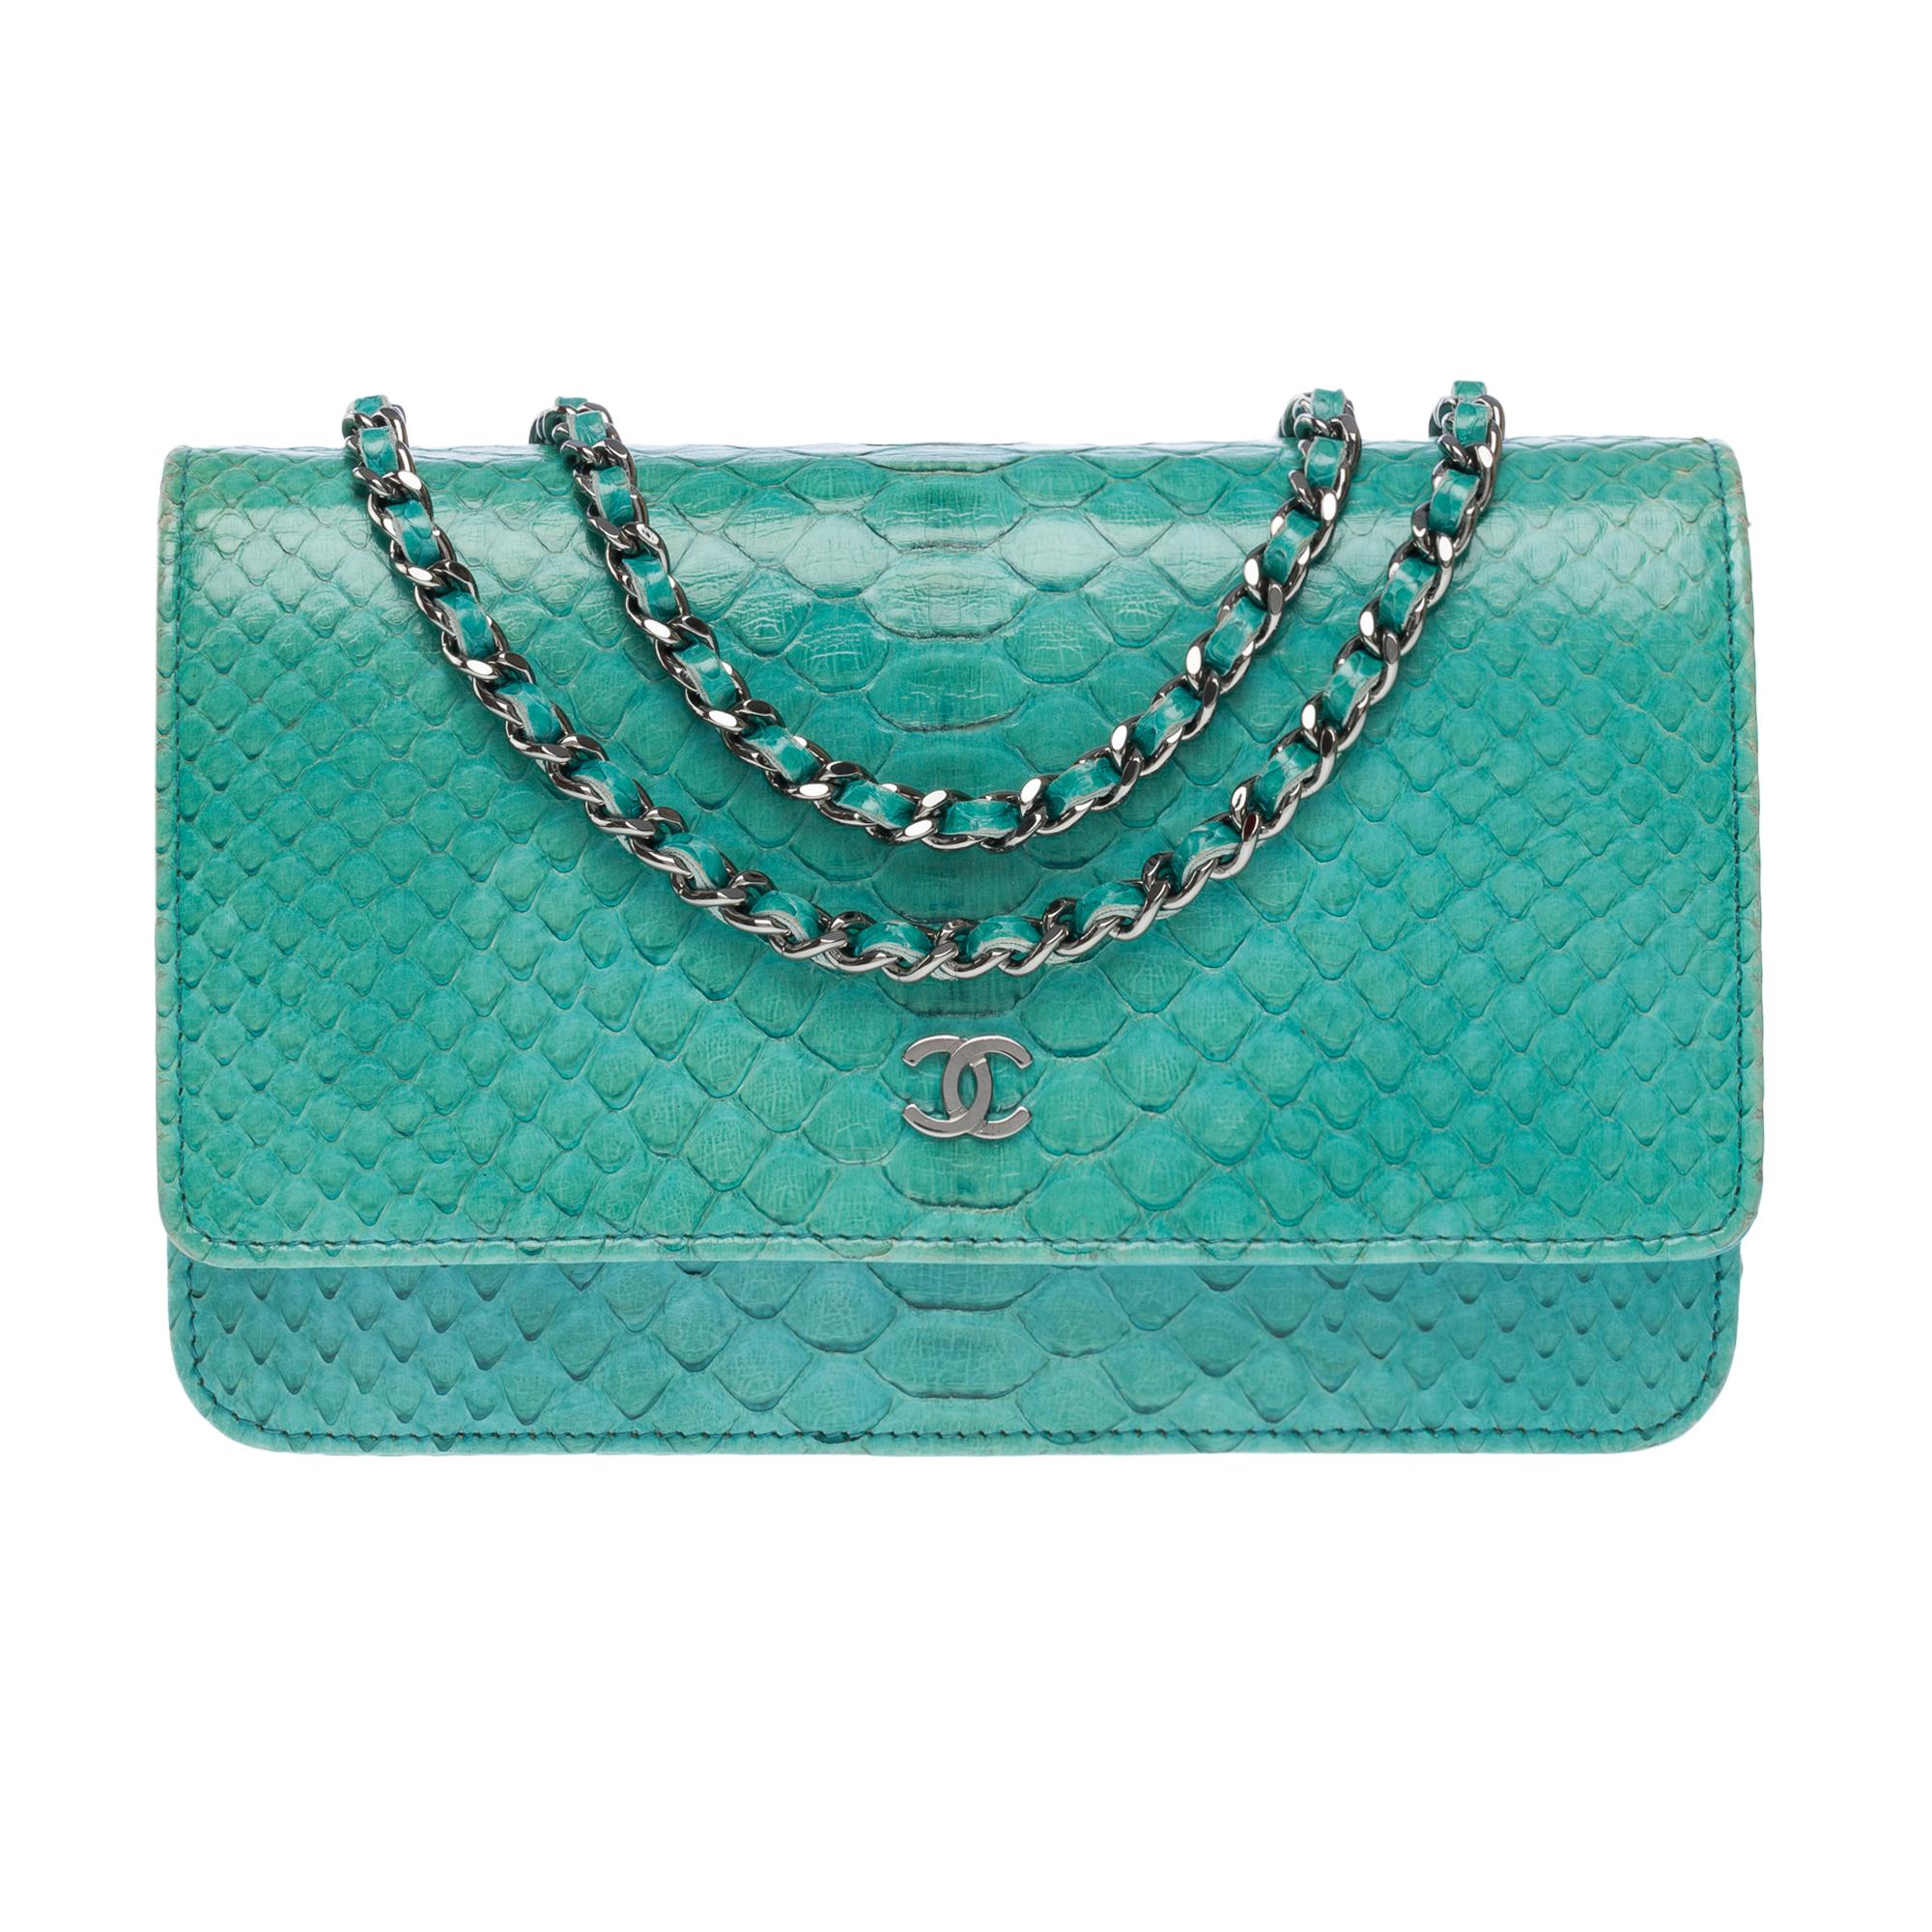 Women's Chanel Wallet on Chain (WOC)  shoulder bag in Turquoise Blue Python leather, SHW